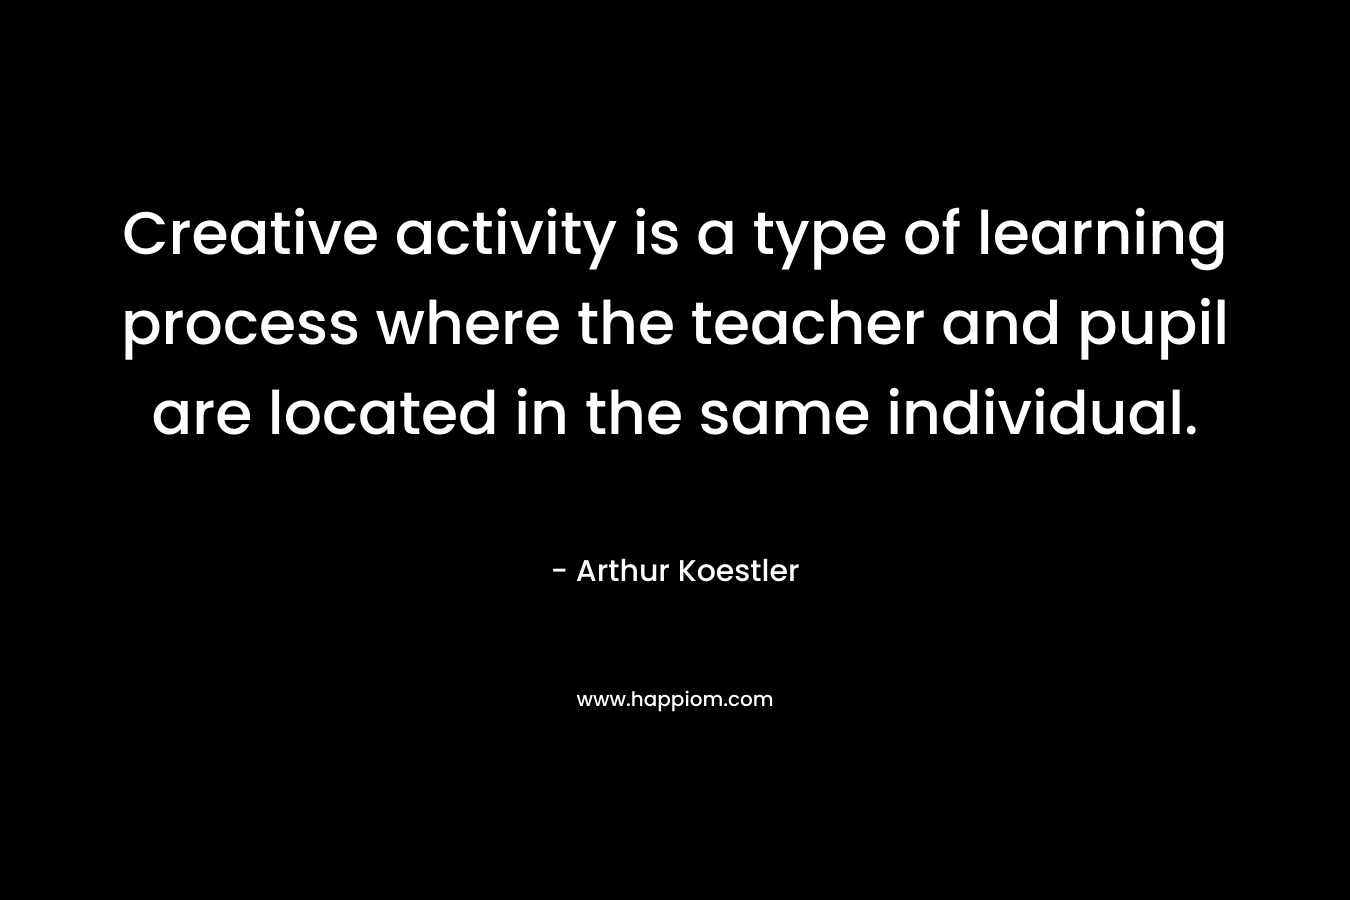 Creative activity is a type of learning process where the teacher and pupil are located in the same individual. – Arthur Koestler